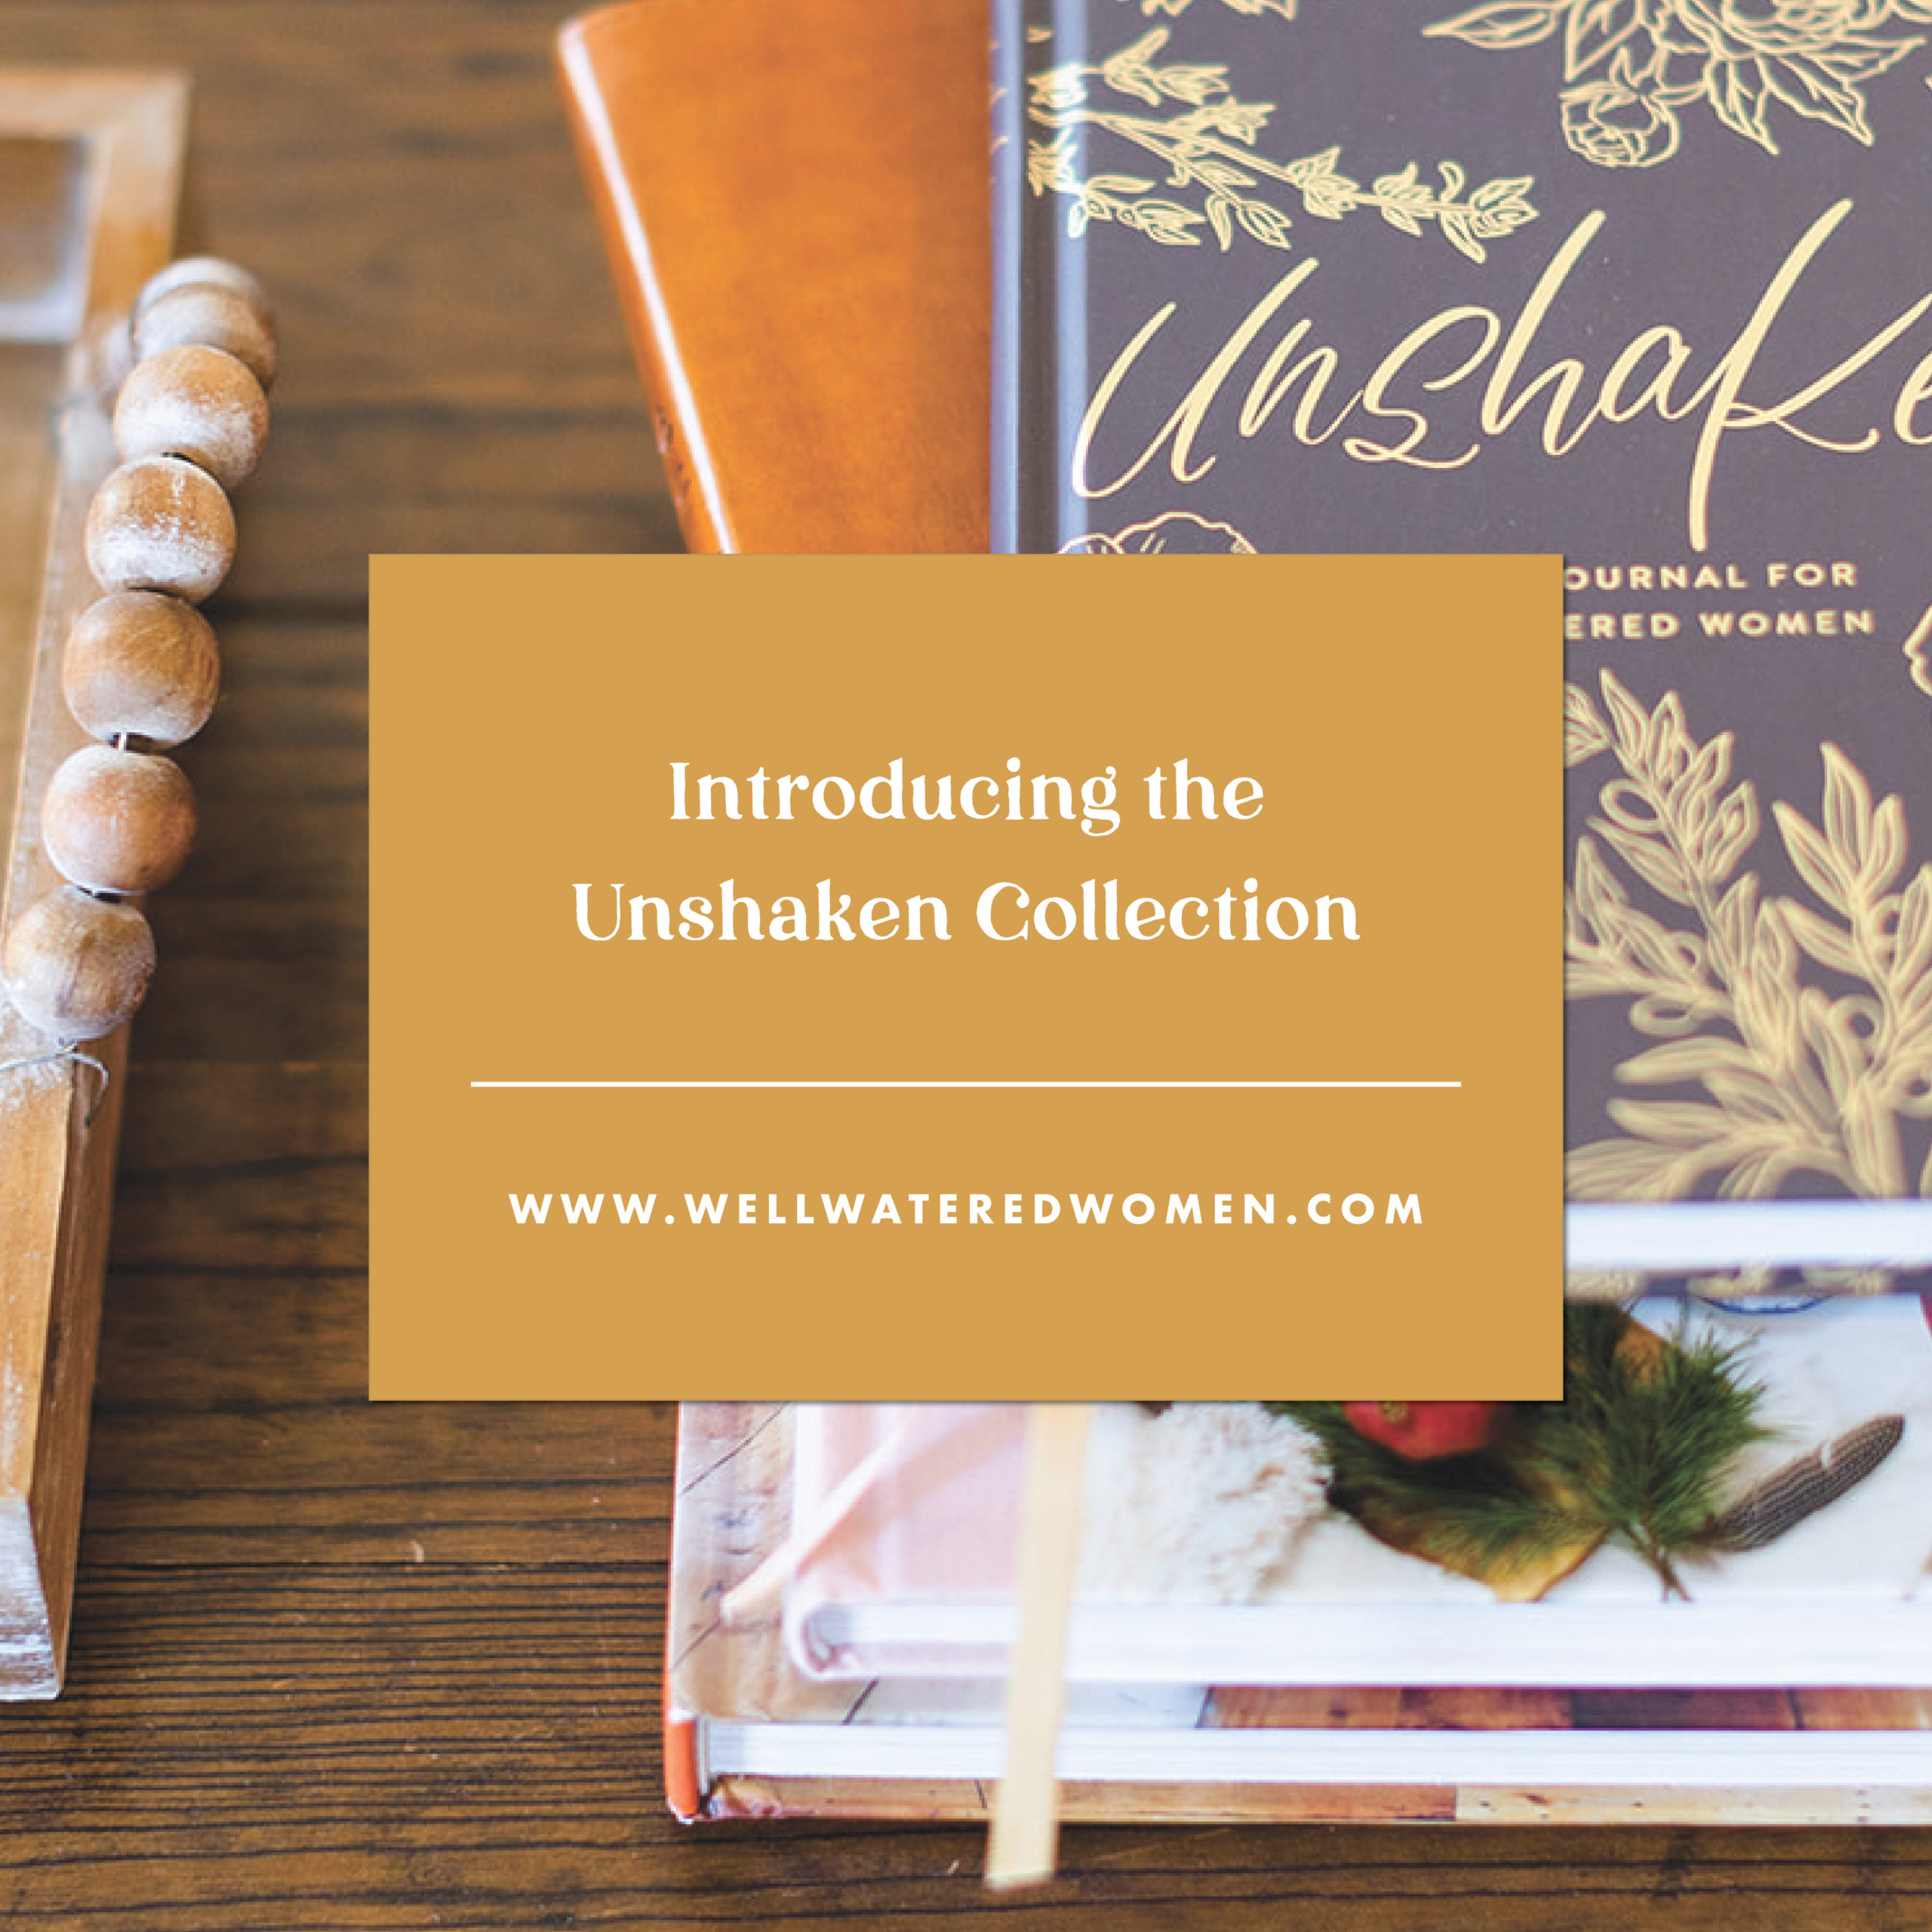 Introducing the Unshaken Collection